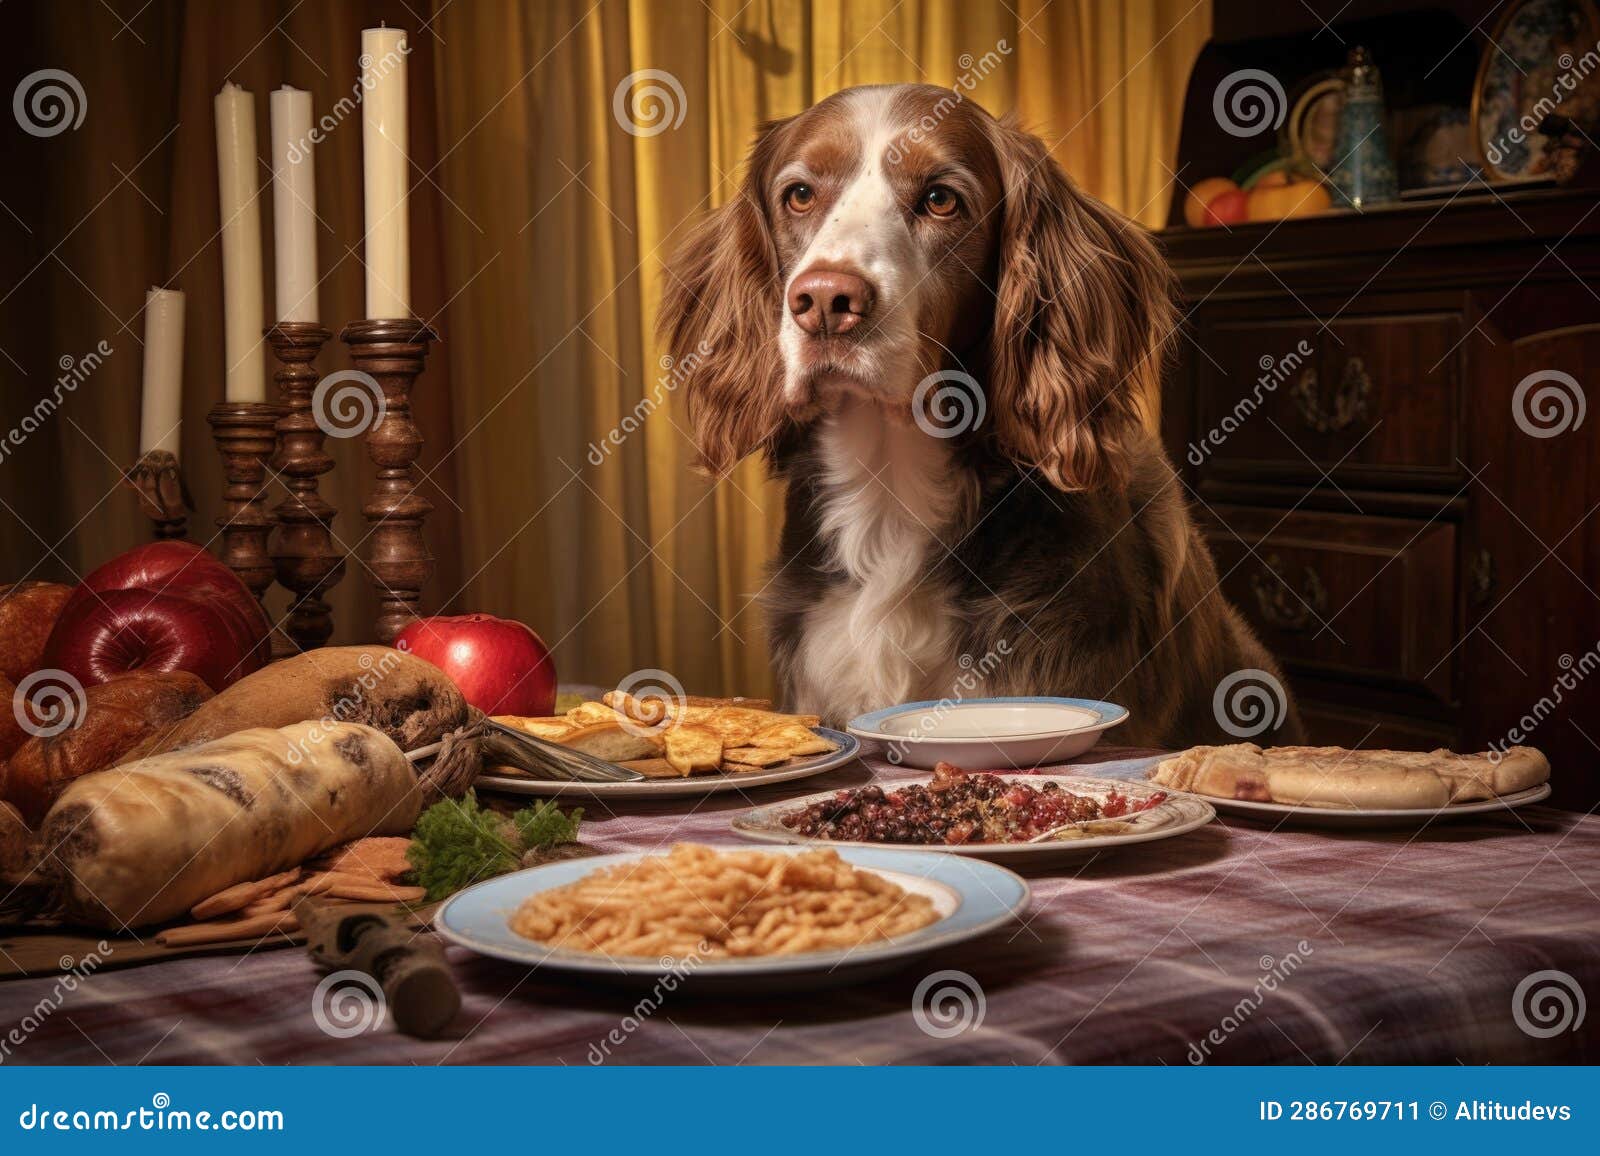 hungry dog staring longingly at a plate of food